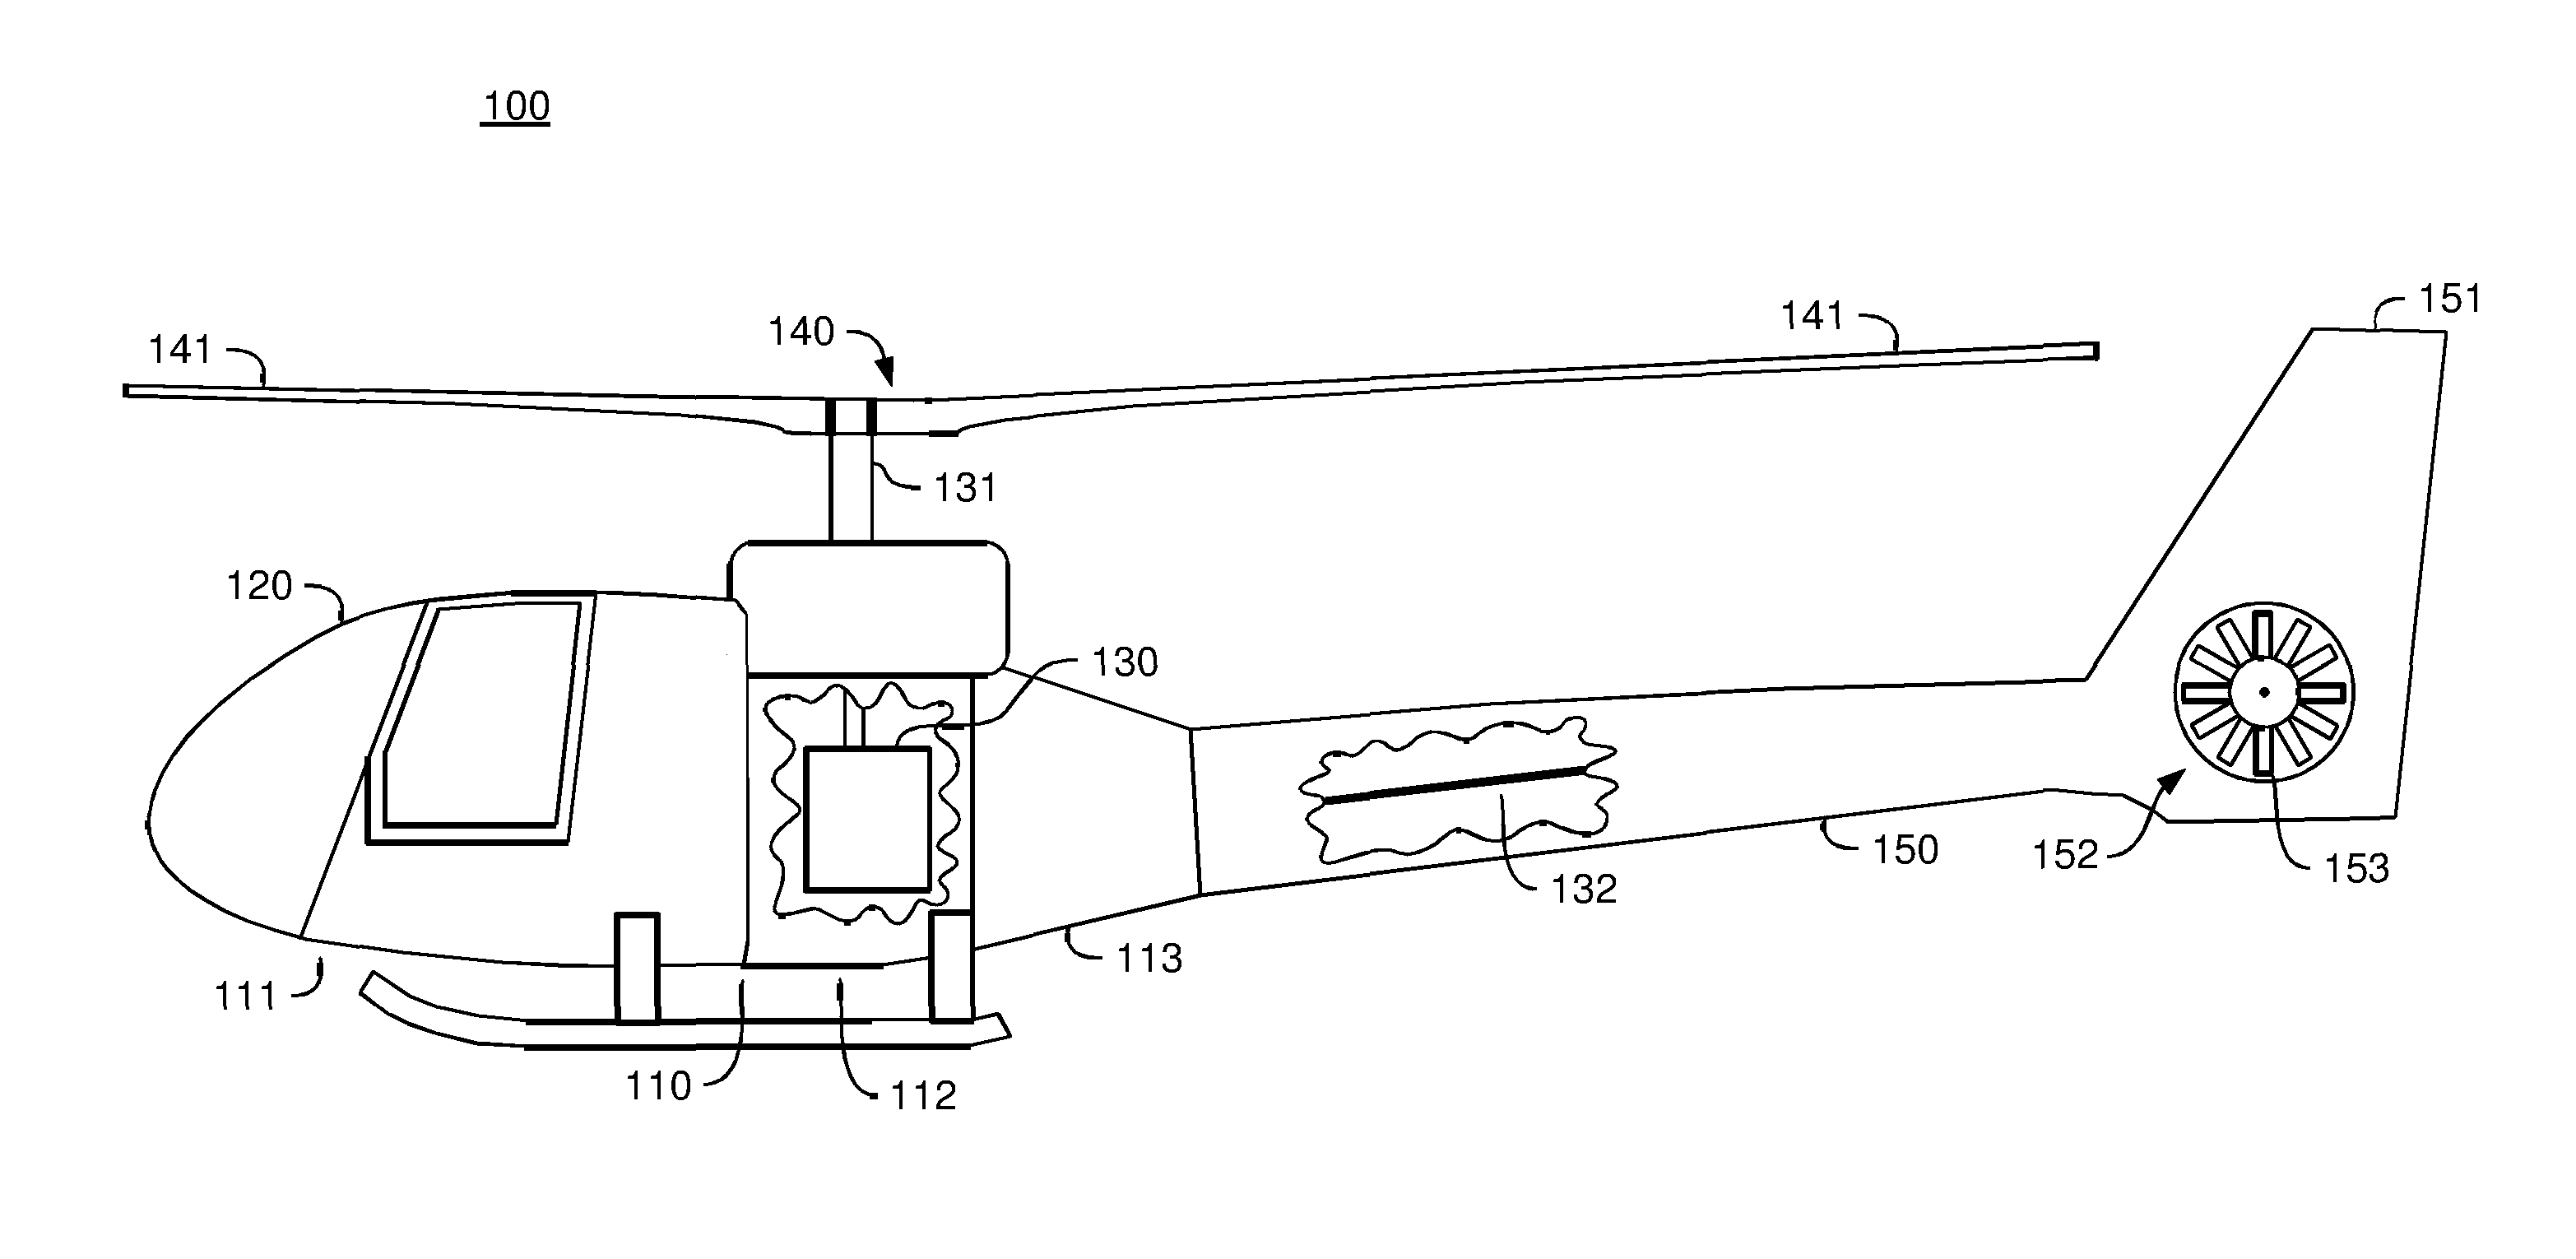 Method, apparatus and system for reducing vibration in a rotary system of an aircraft, such as a rotor of a helicopter